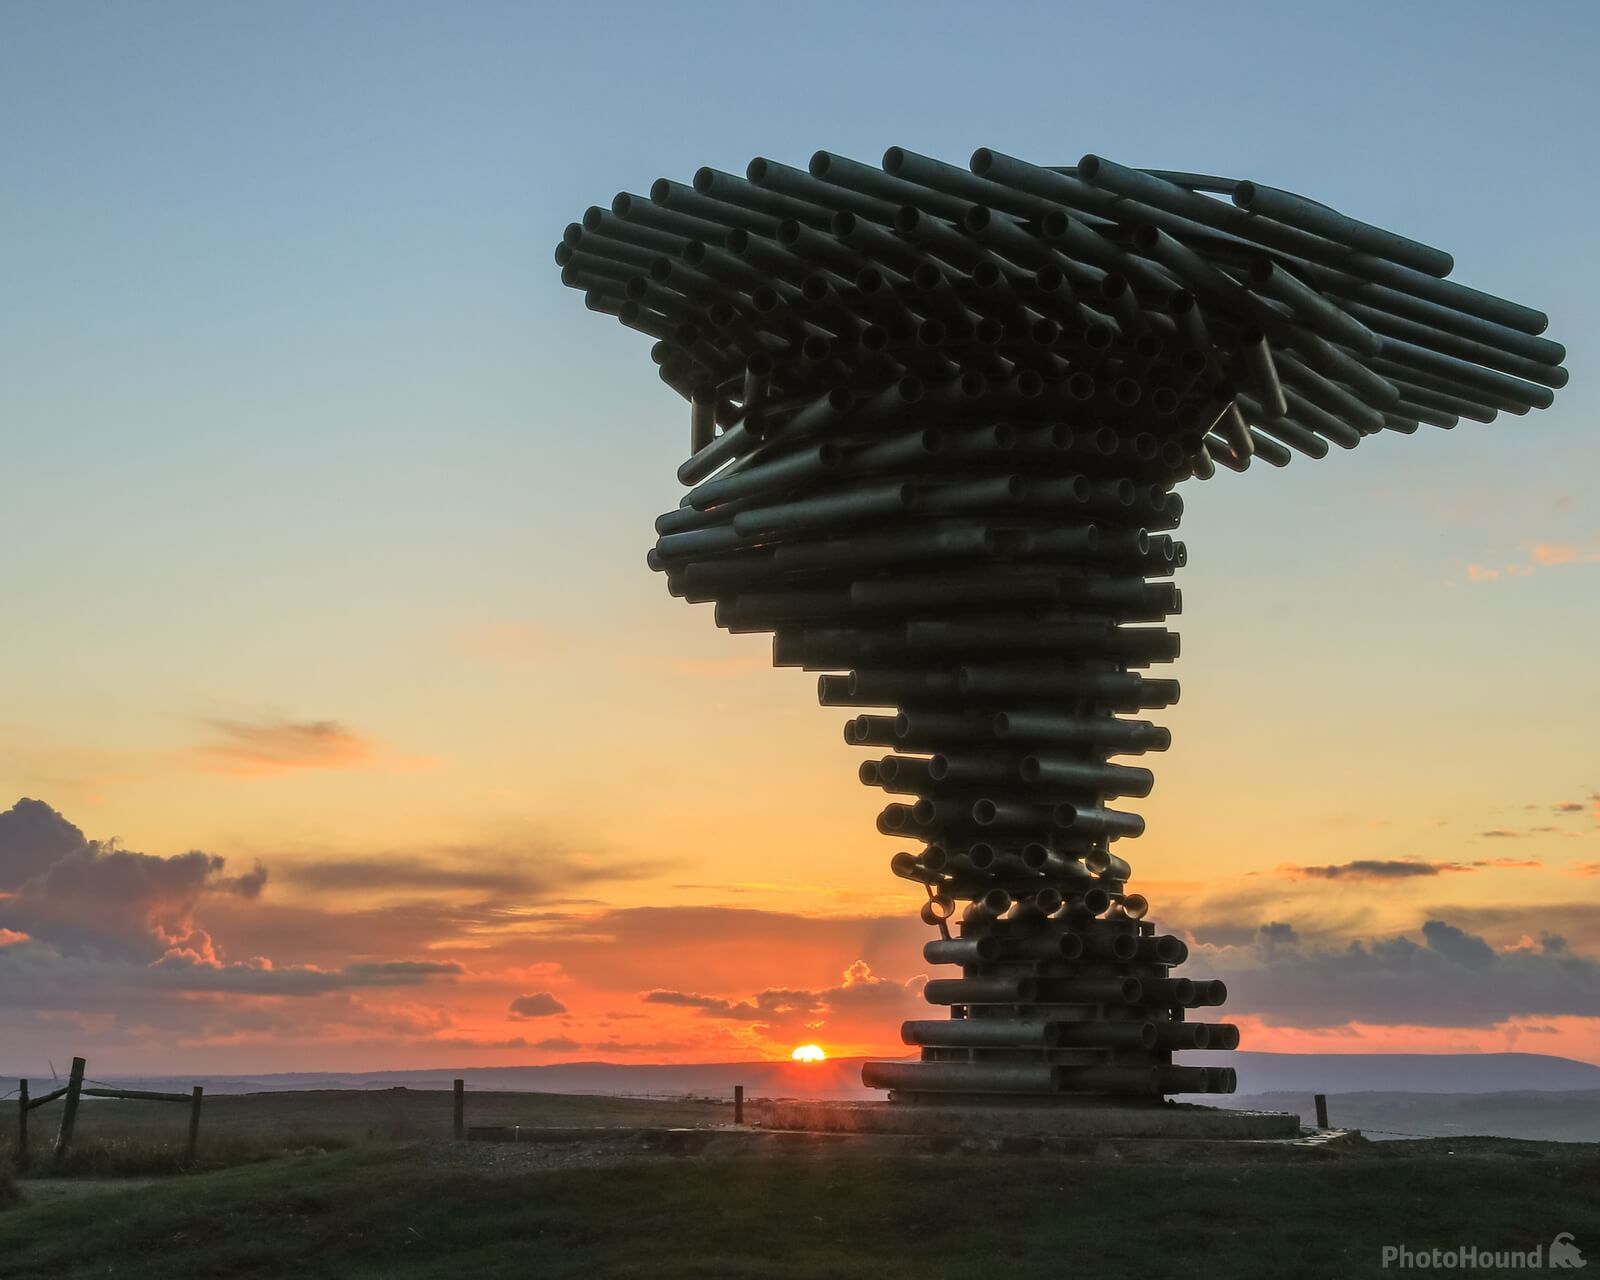 Image of The Singing Ringing Tree by Andy Killingbeck